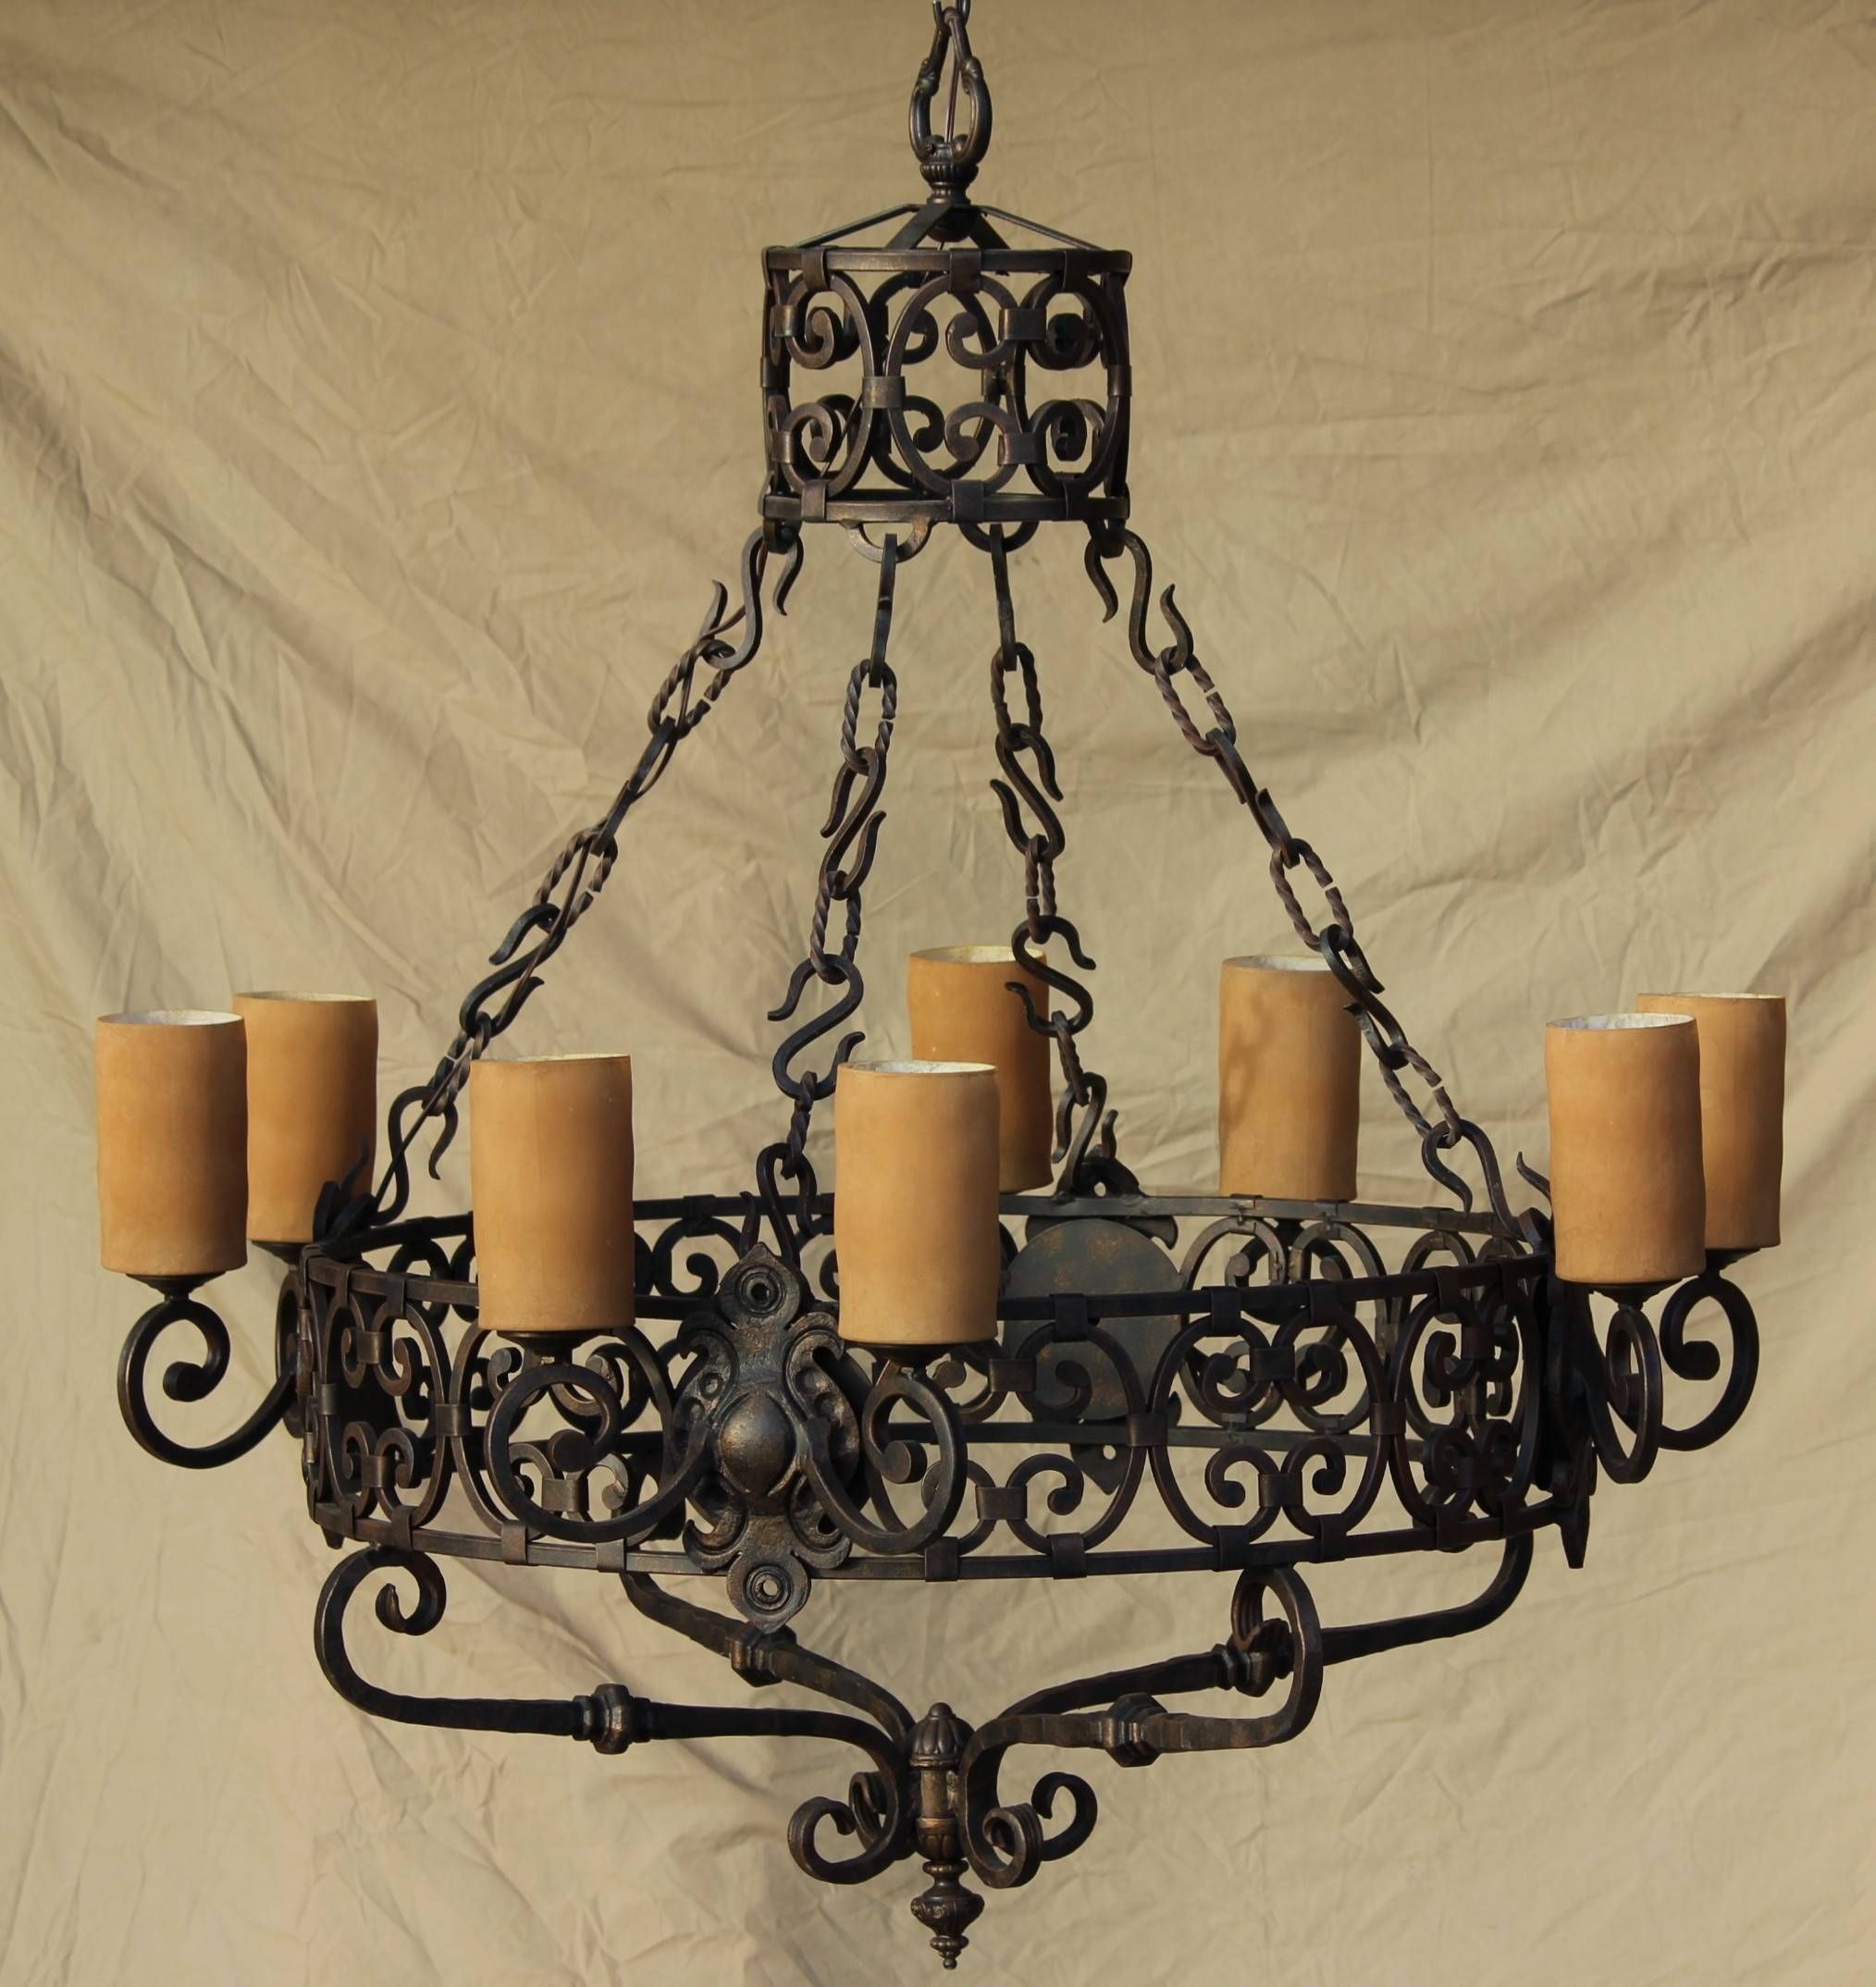 Amazing Wrought Iron Ceiling Lights 33 With Additional Copper Mini Regarding Wrought Iron Mini Pendant Lights (View 10 of 15)